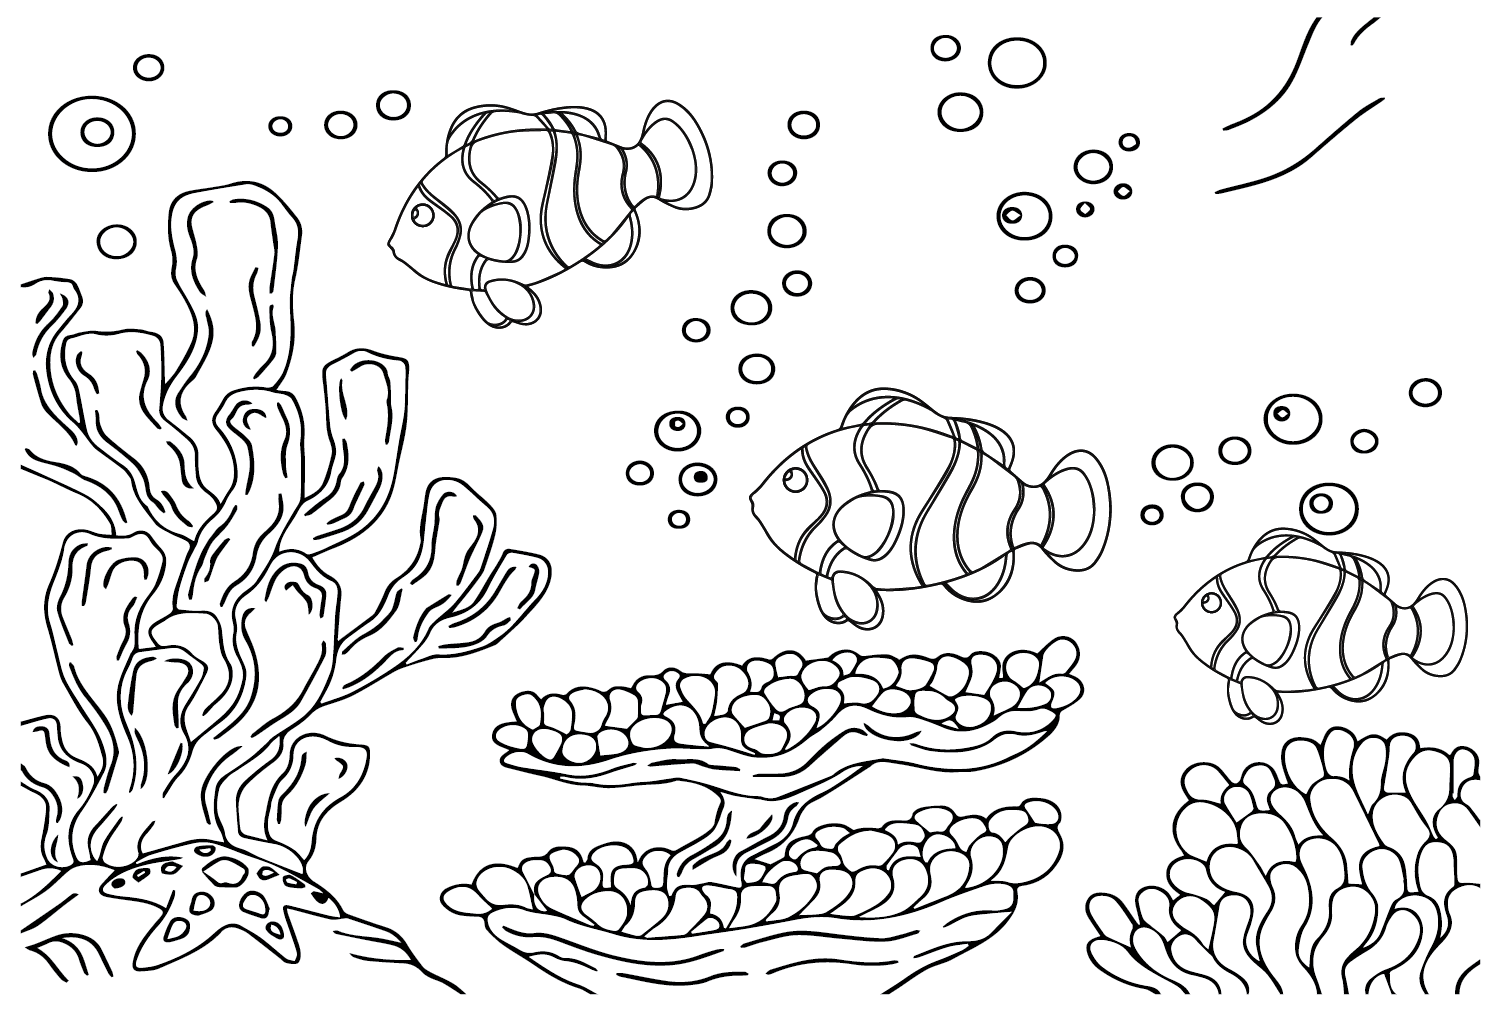 Clownfish in The Sea Coloring Page - Free Printable Coloring Pages